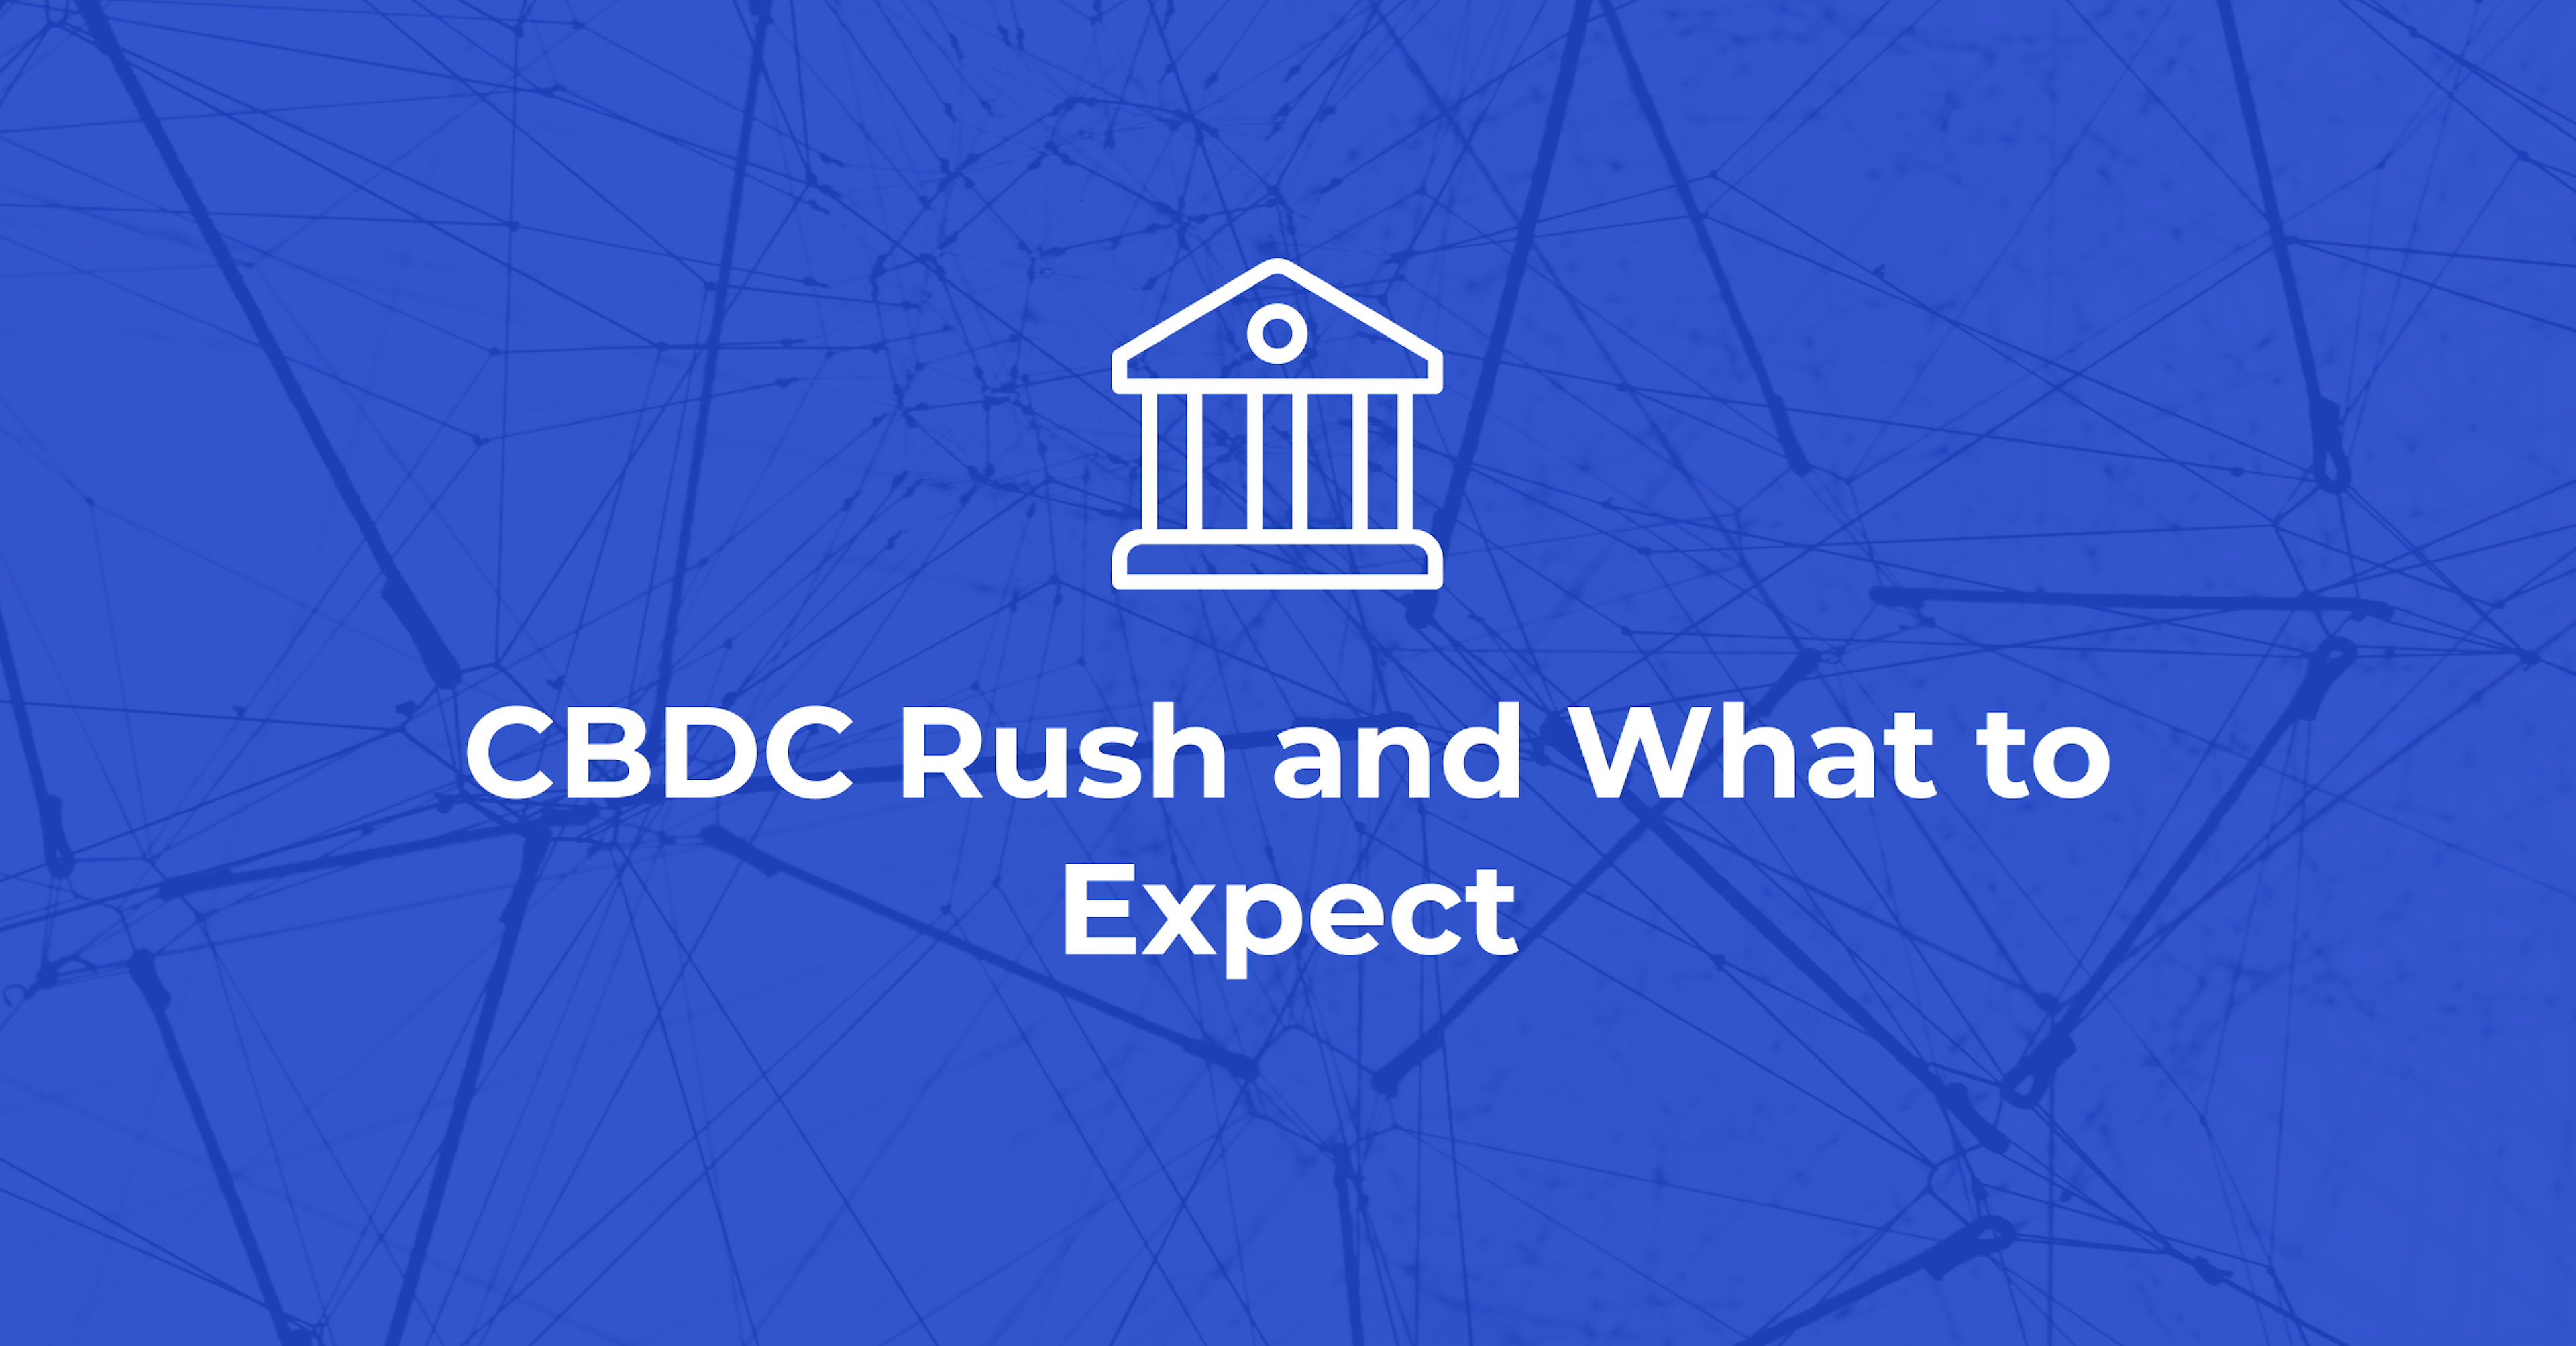 Central Bank Digital Currency (CBDC) Rush and What to Expect